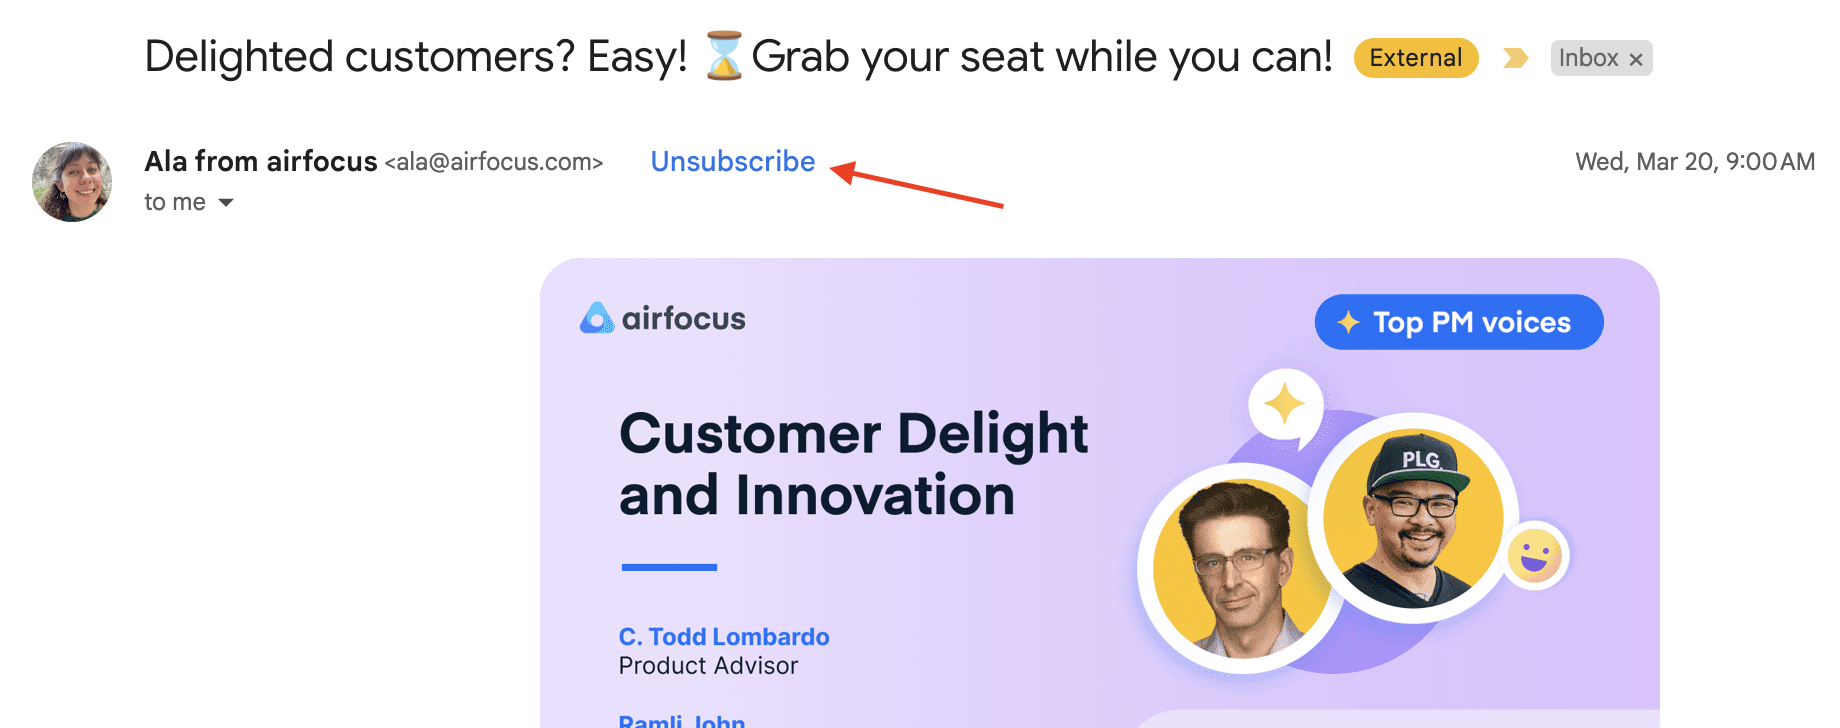 One-Click Unsubscribe from Email Body